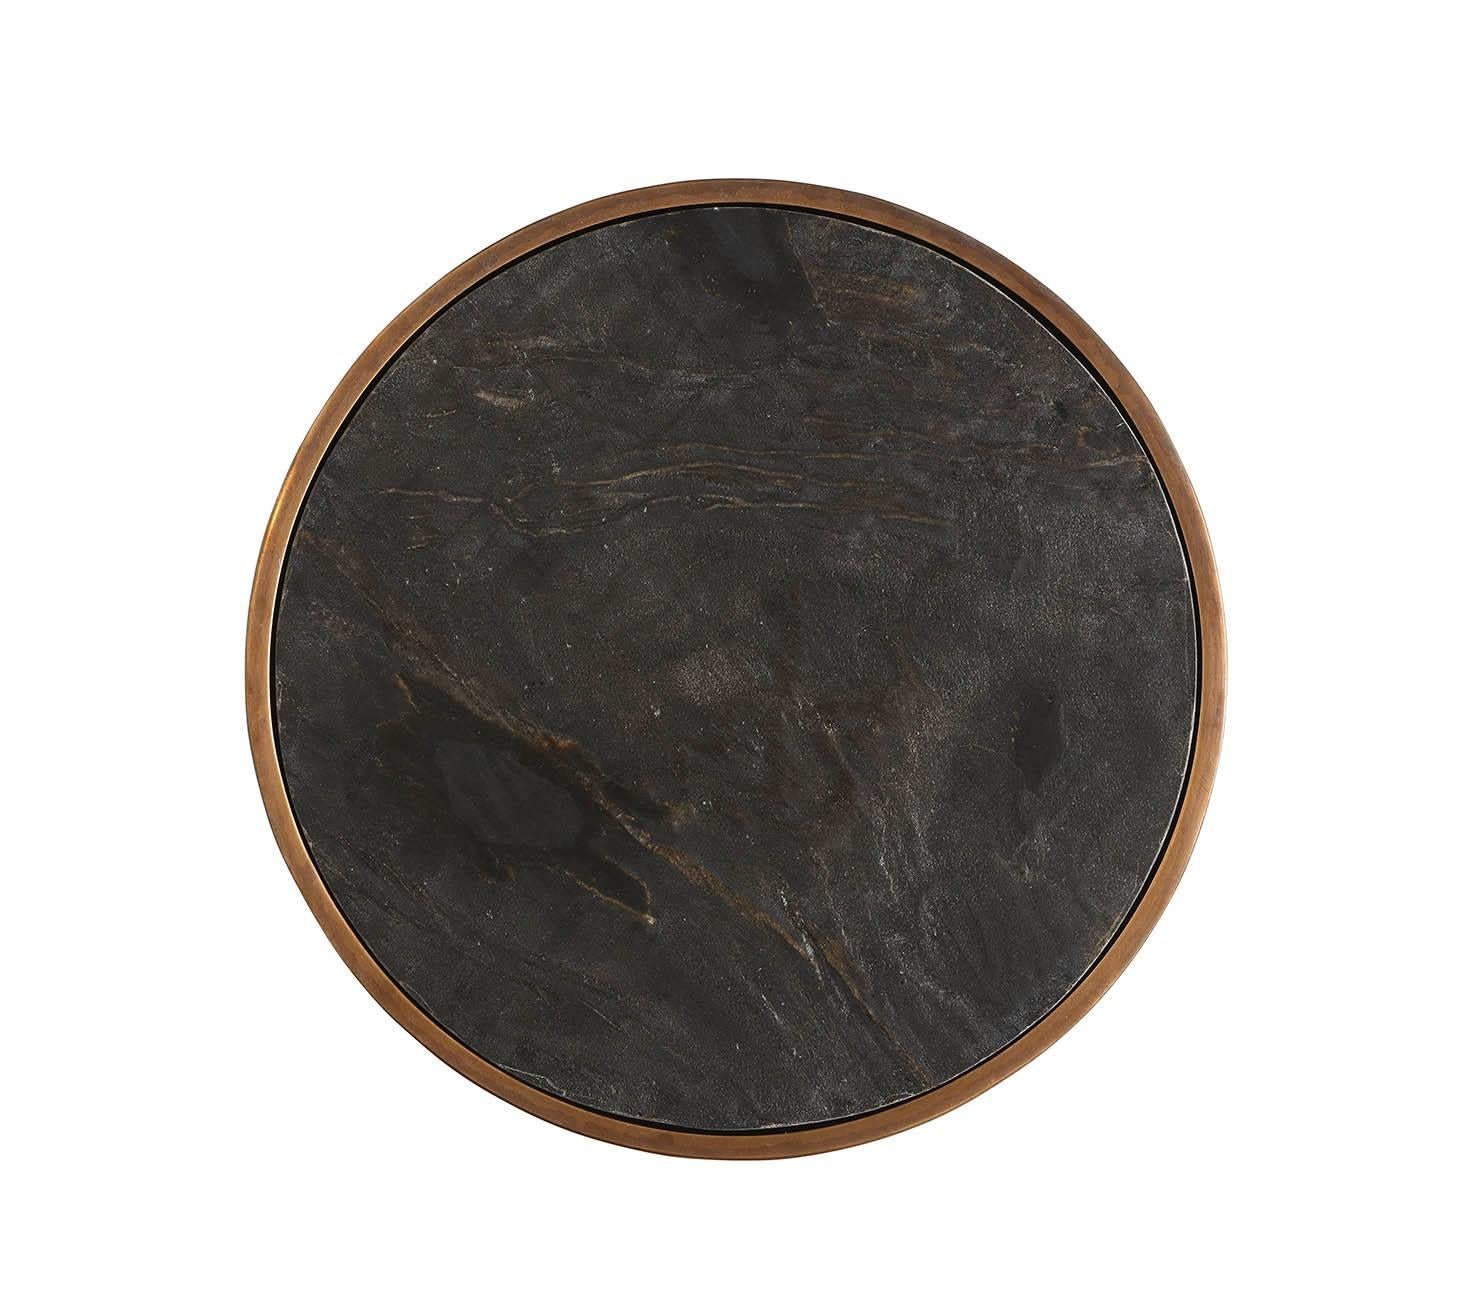 Fine contemporary table by Studio Gallet.
Hand-hammered patinated bronze and classic black marble with textured leather finish.
Each piece is handcrafted in New York City.
Numbered and signed.
Custom size available within two to four